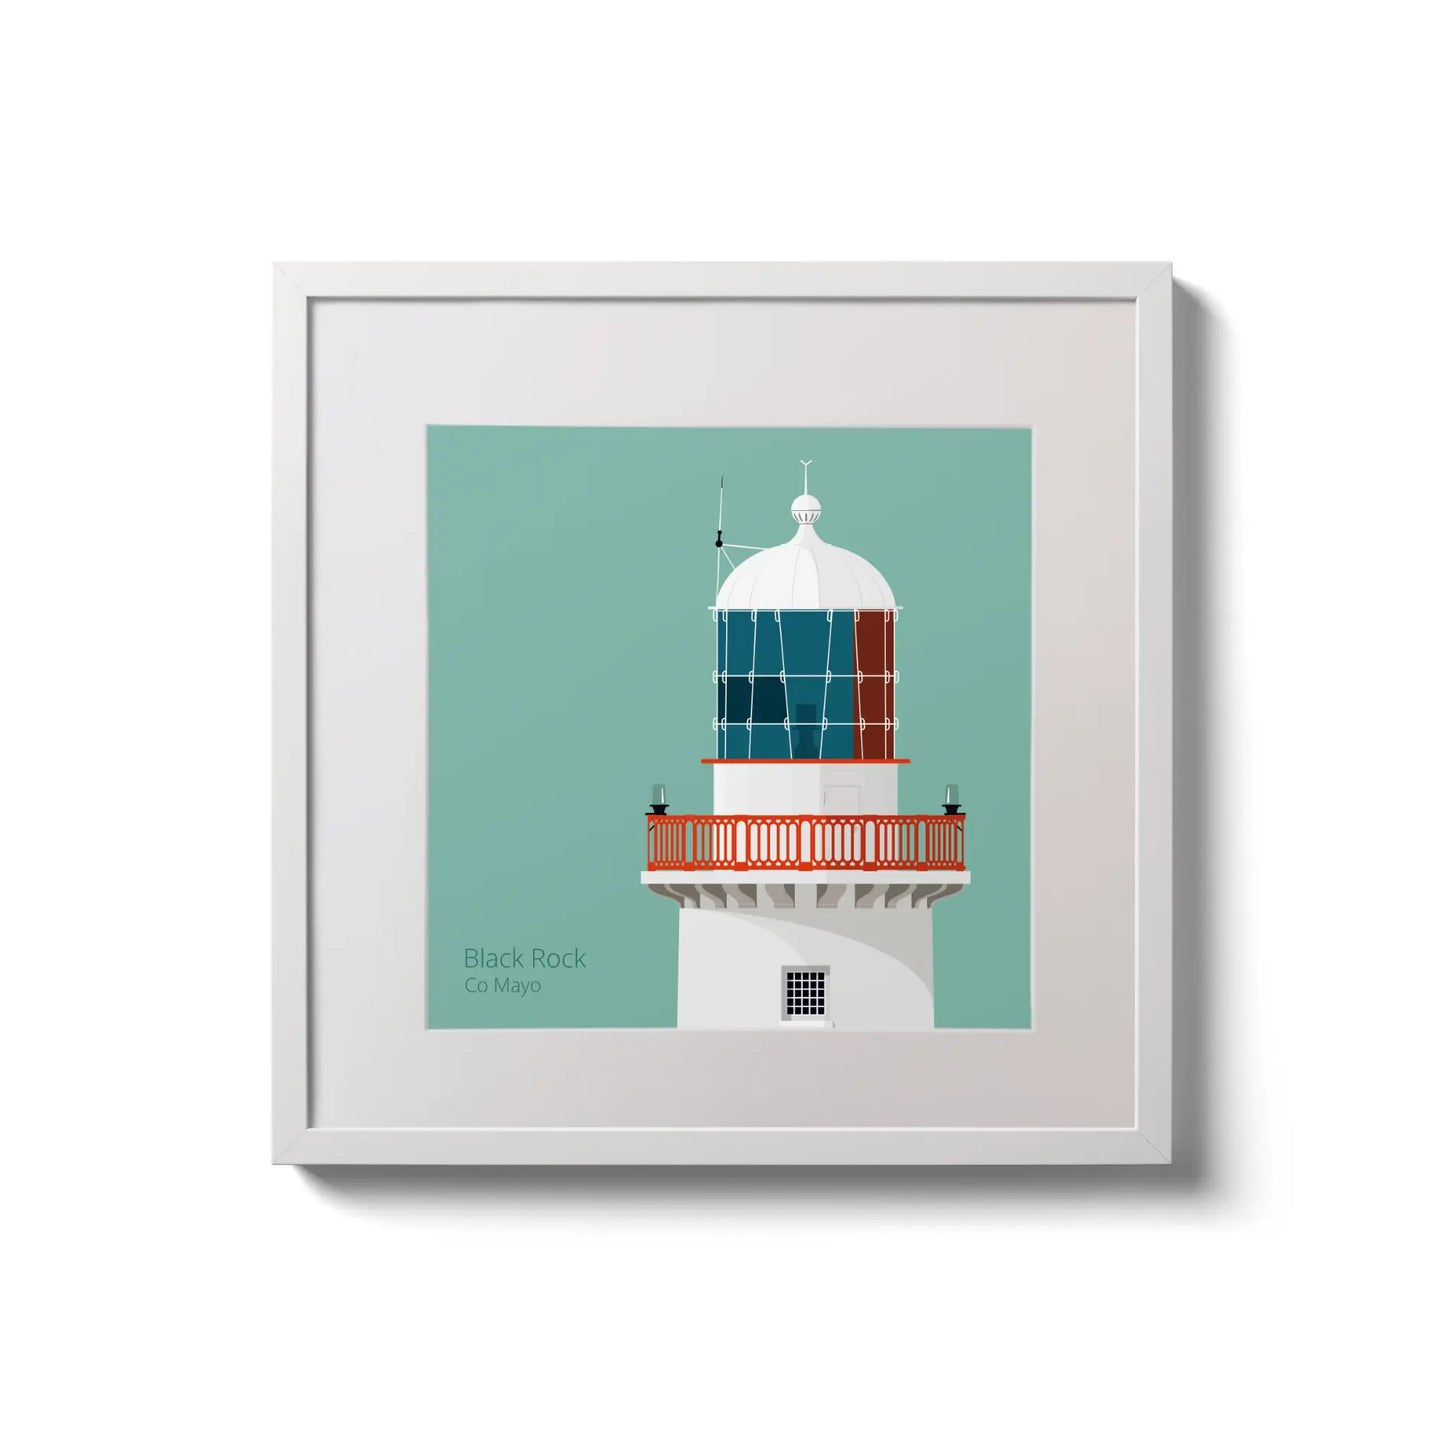 Illustration of Black Rock lighthouse on an ocean green background,  in a white square frame measuring 20x20cm.